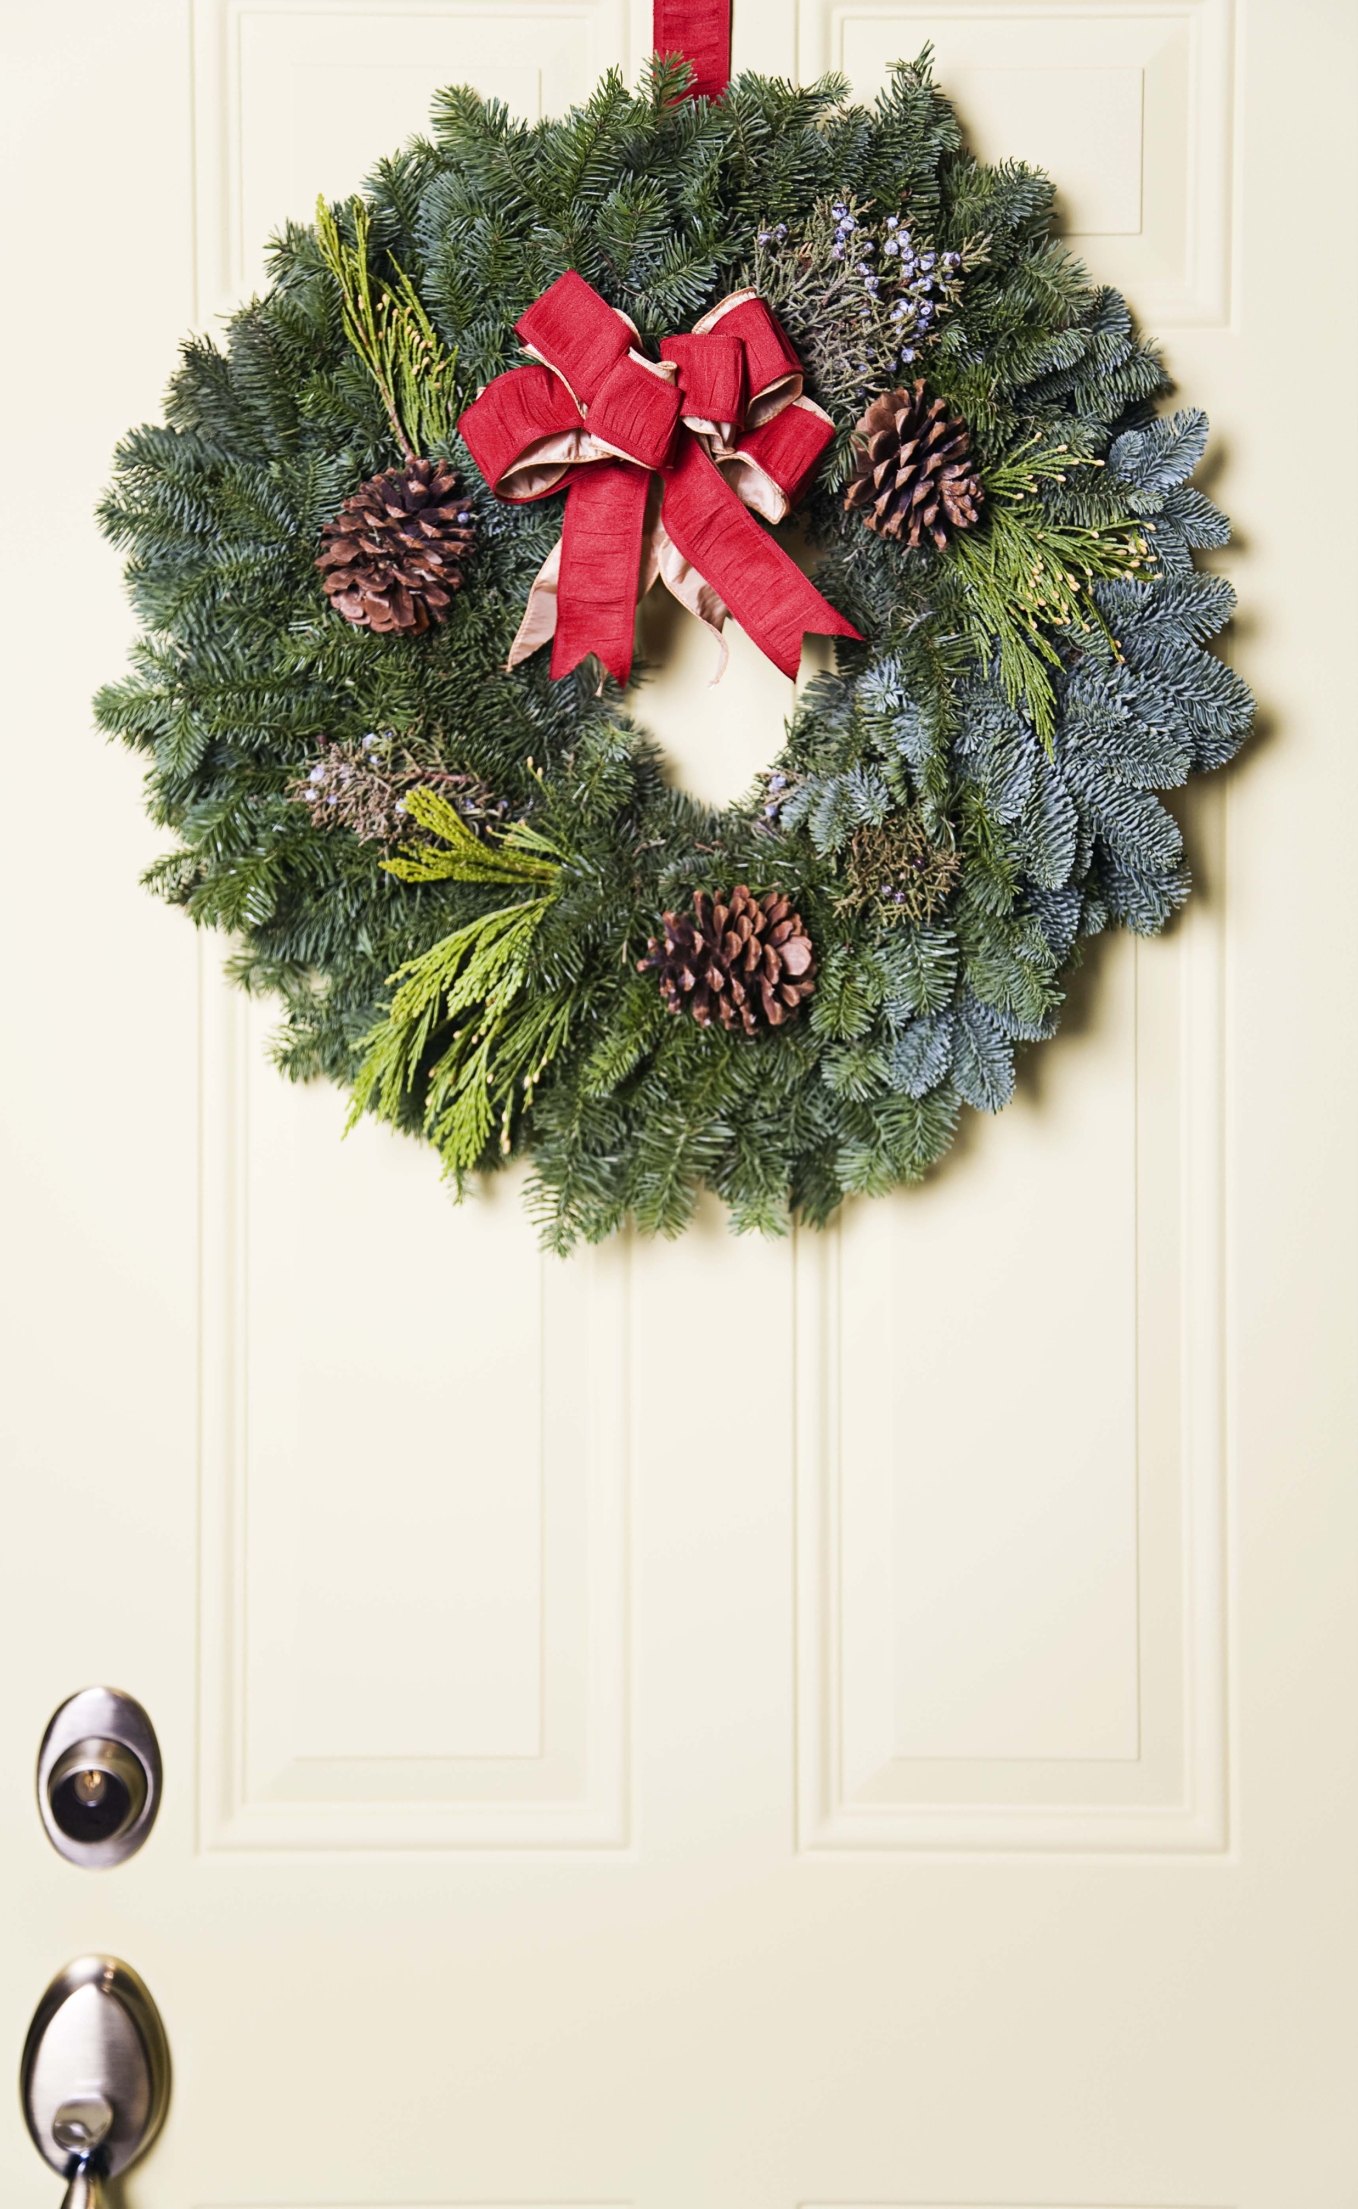 How to Make a Simple Wreath for the Front Door | eHow